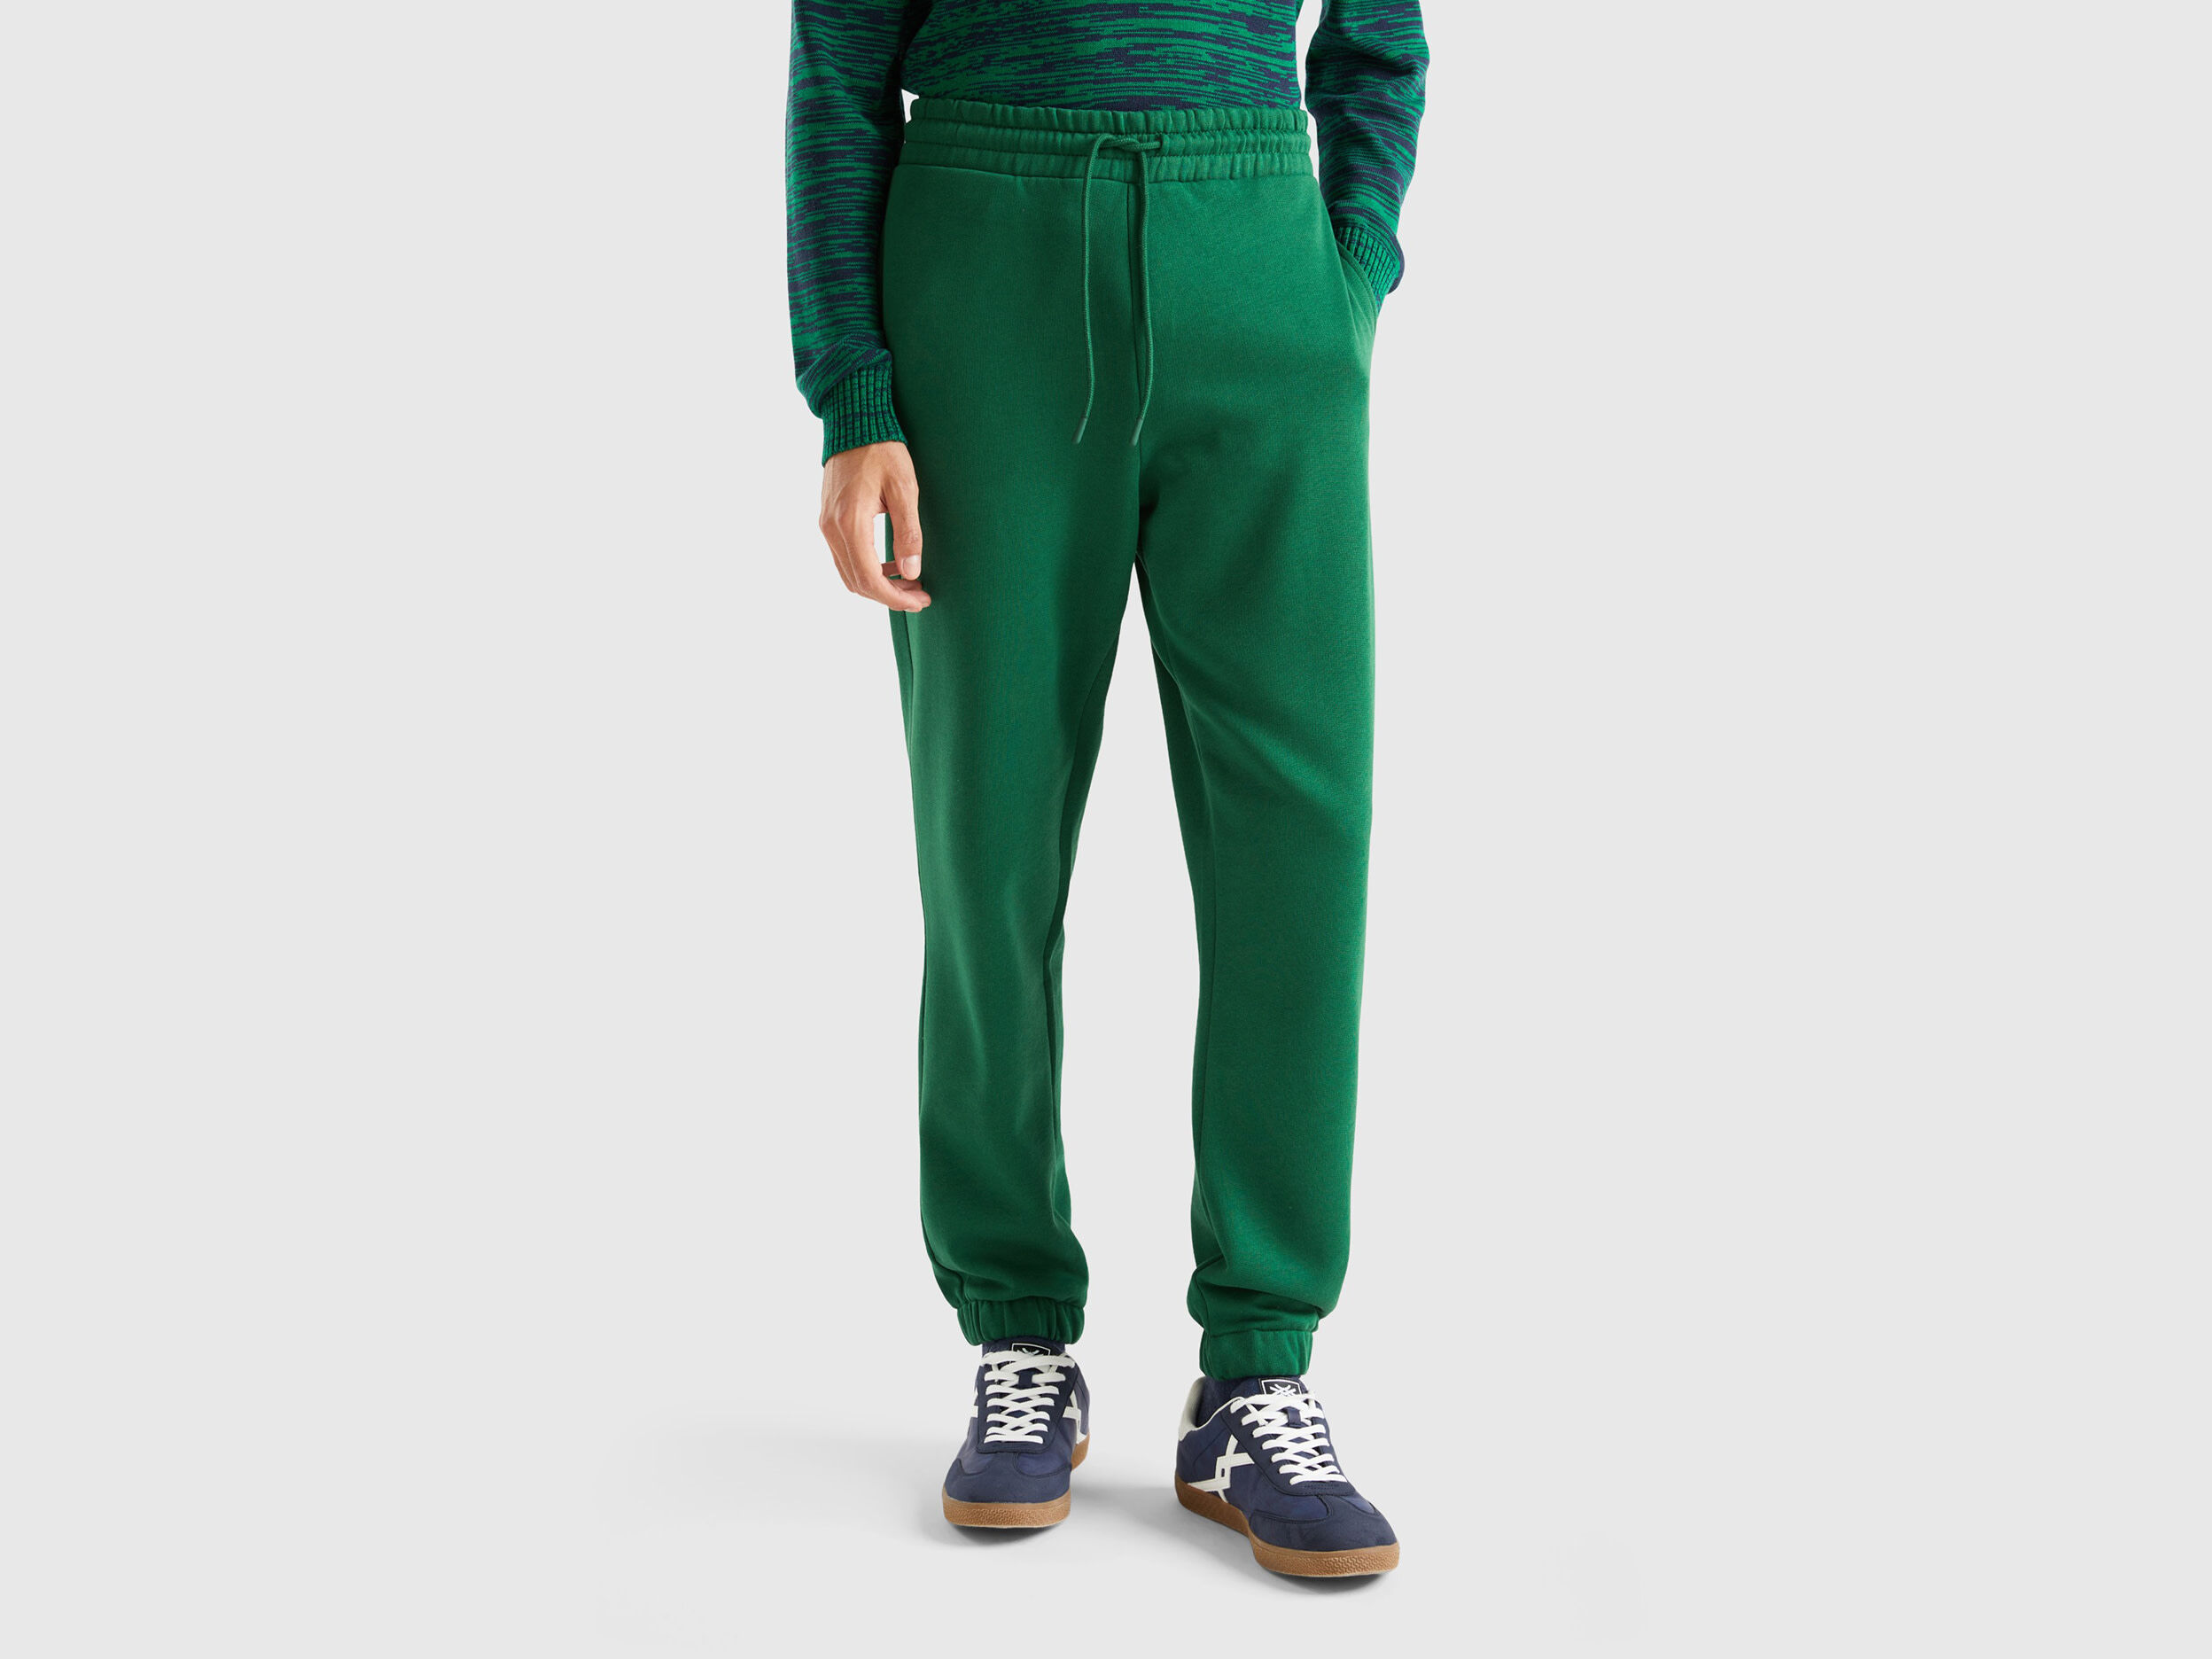 Men's Relax Dude Sweatpants $49.99 – The Relax Stores